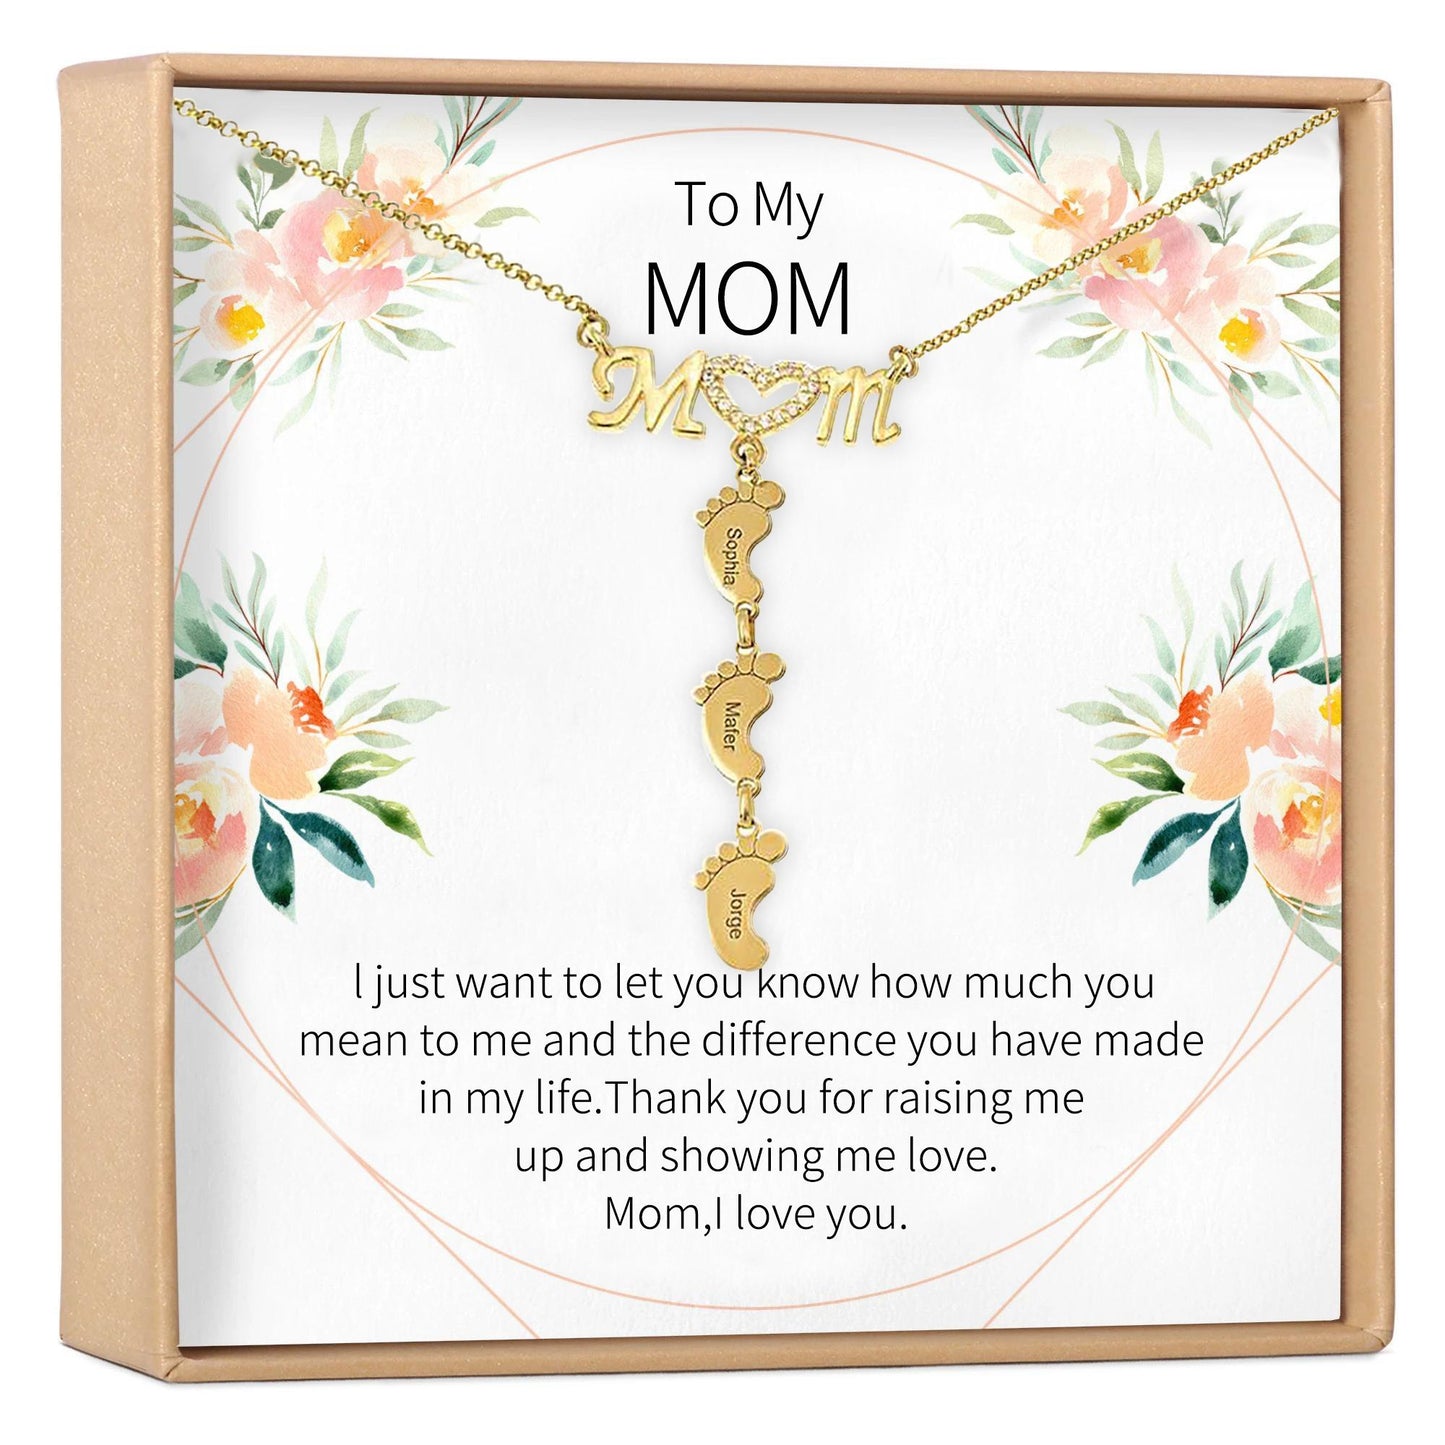 Mother's Day Gift Diamond Mom Necklace With Baby Feet